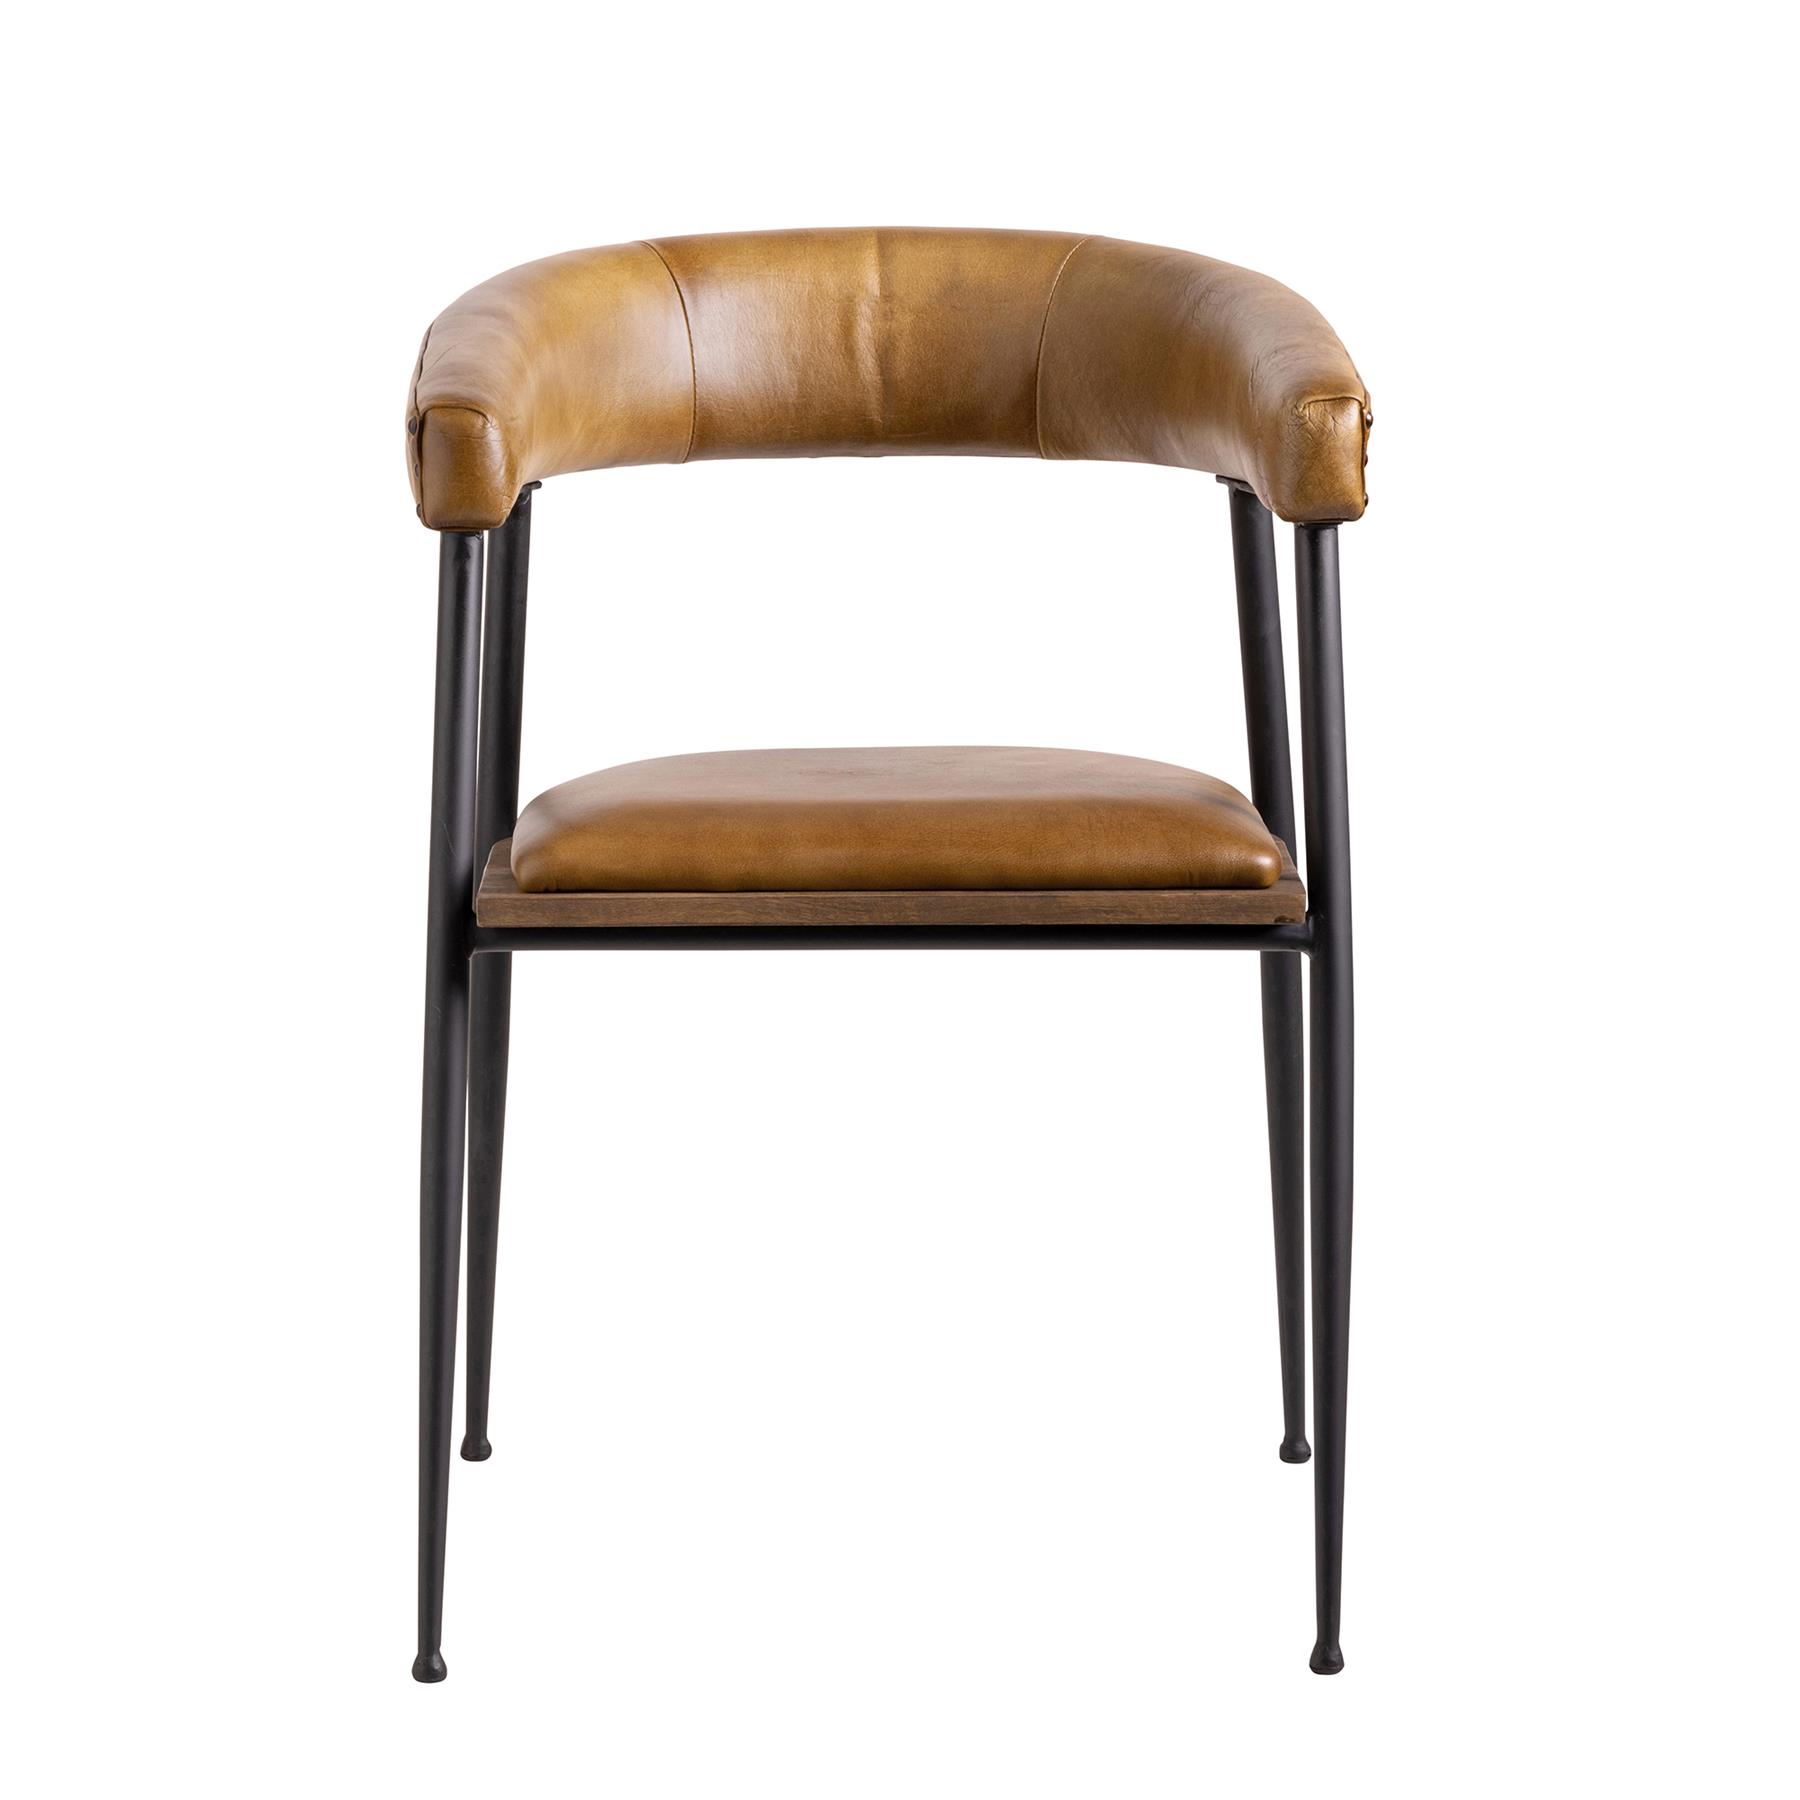 Captains Dining Chair - Olive Brown Real Leather Seat - Black Base